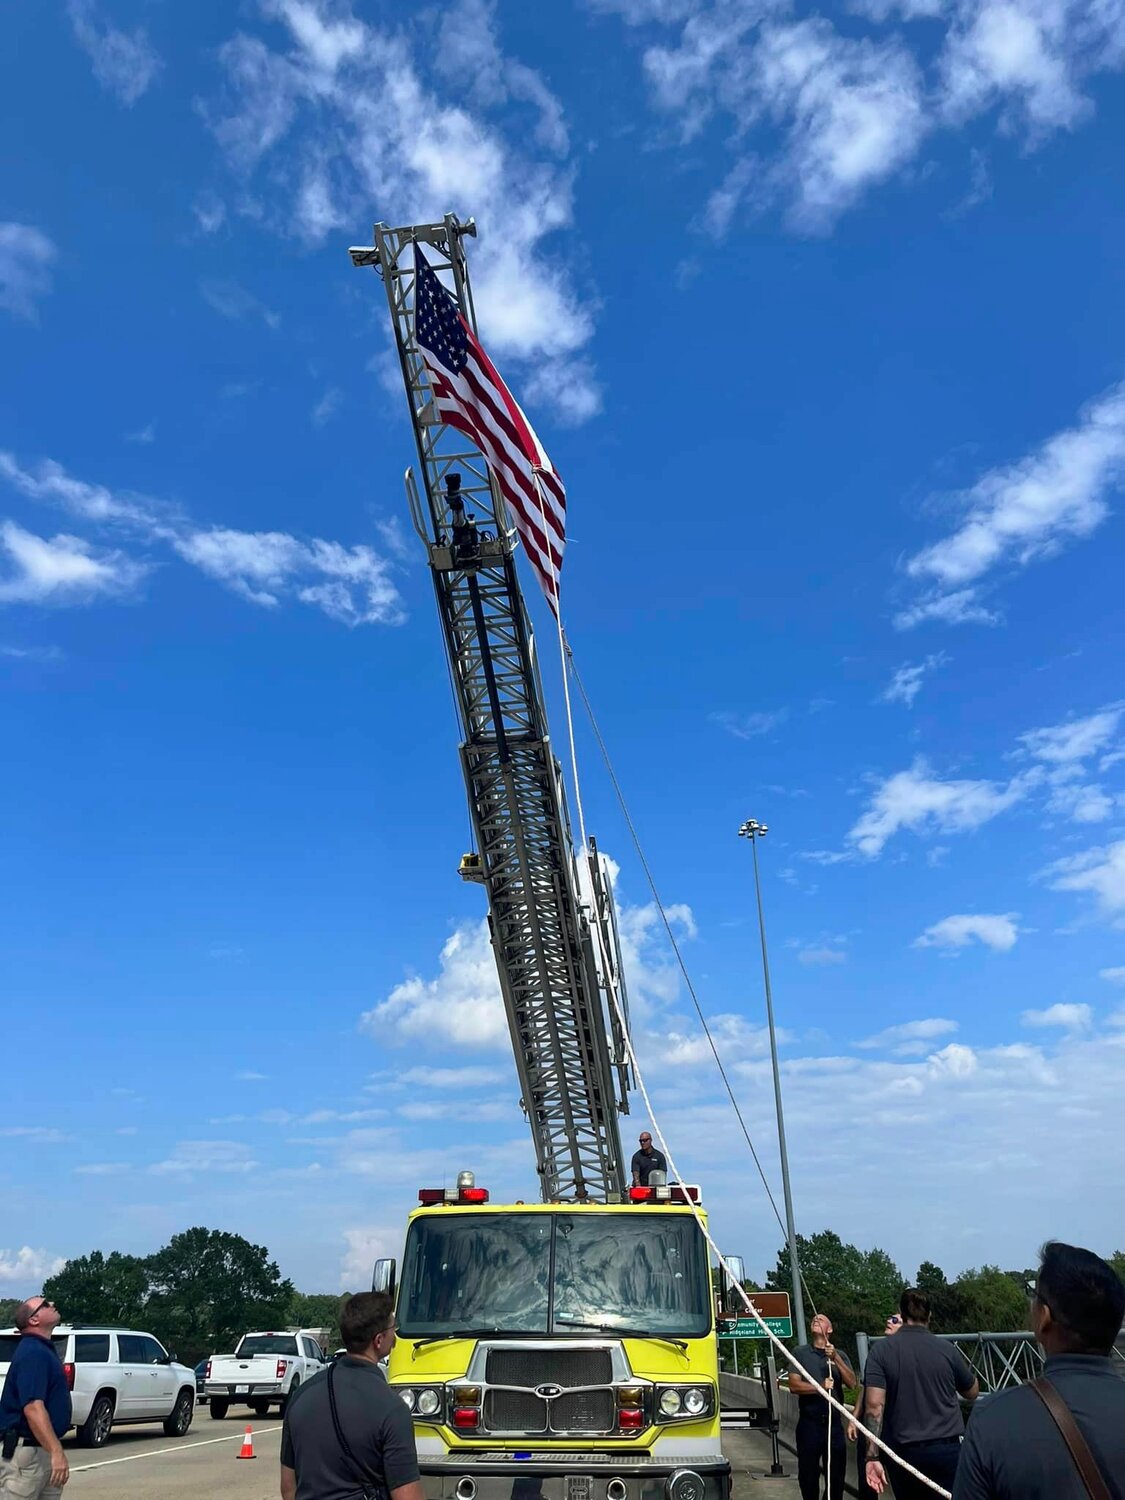 Tyler was transported to the funeral home on June 1. Ridgeland Fire Fighters hoisted a flag on one of their ladder trucks along the route in his honor.

“We were blessed to honor Madison Police Officer Randy Tyler during the procession to the funeral home today,” A social media statement from RFD reads. “thank you for your ultimate sacrifice and your years of dedication to making this world safer.”